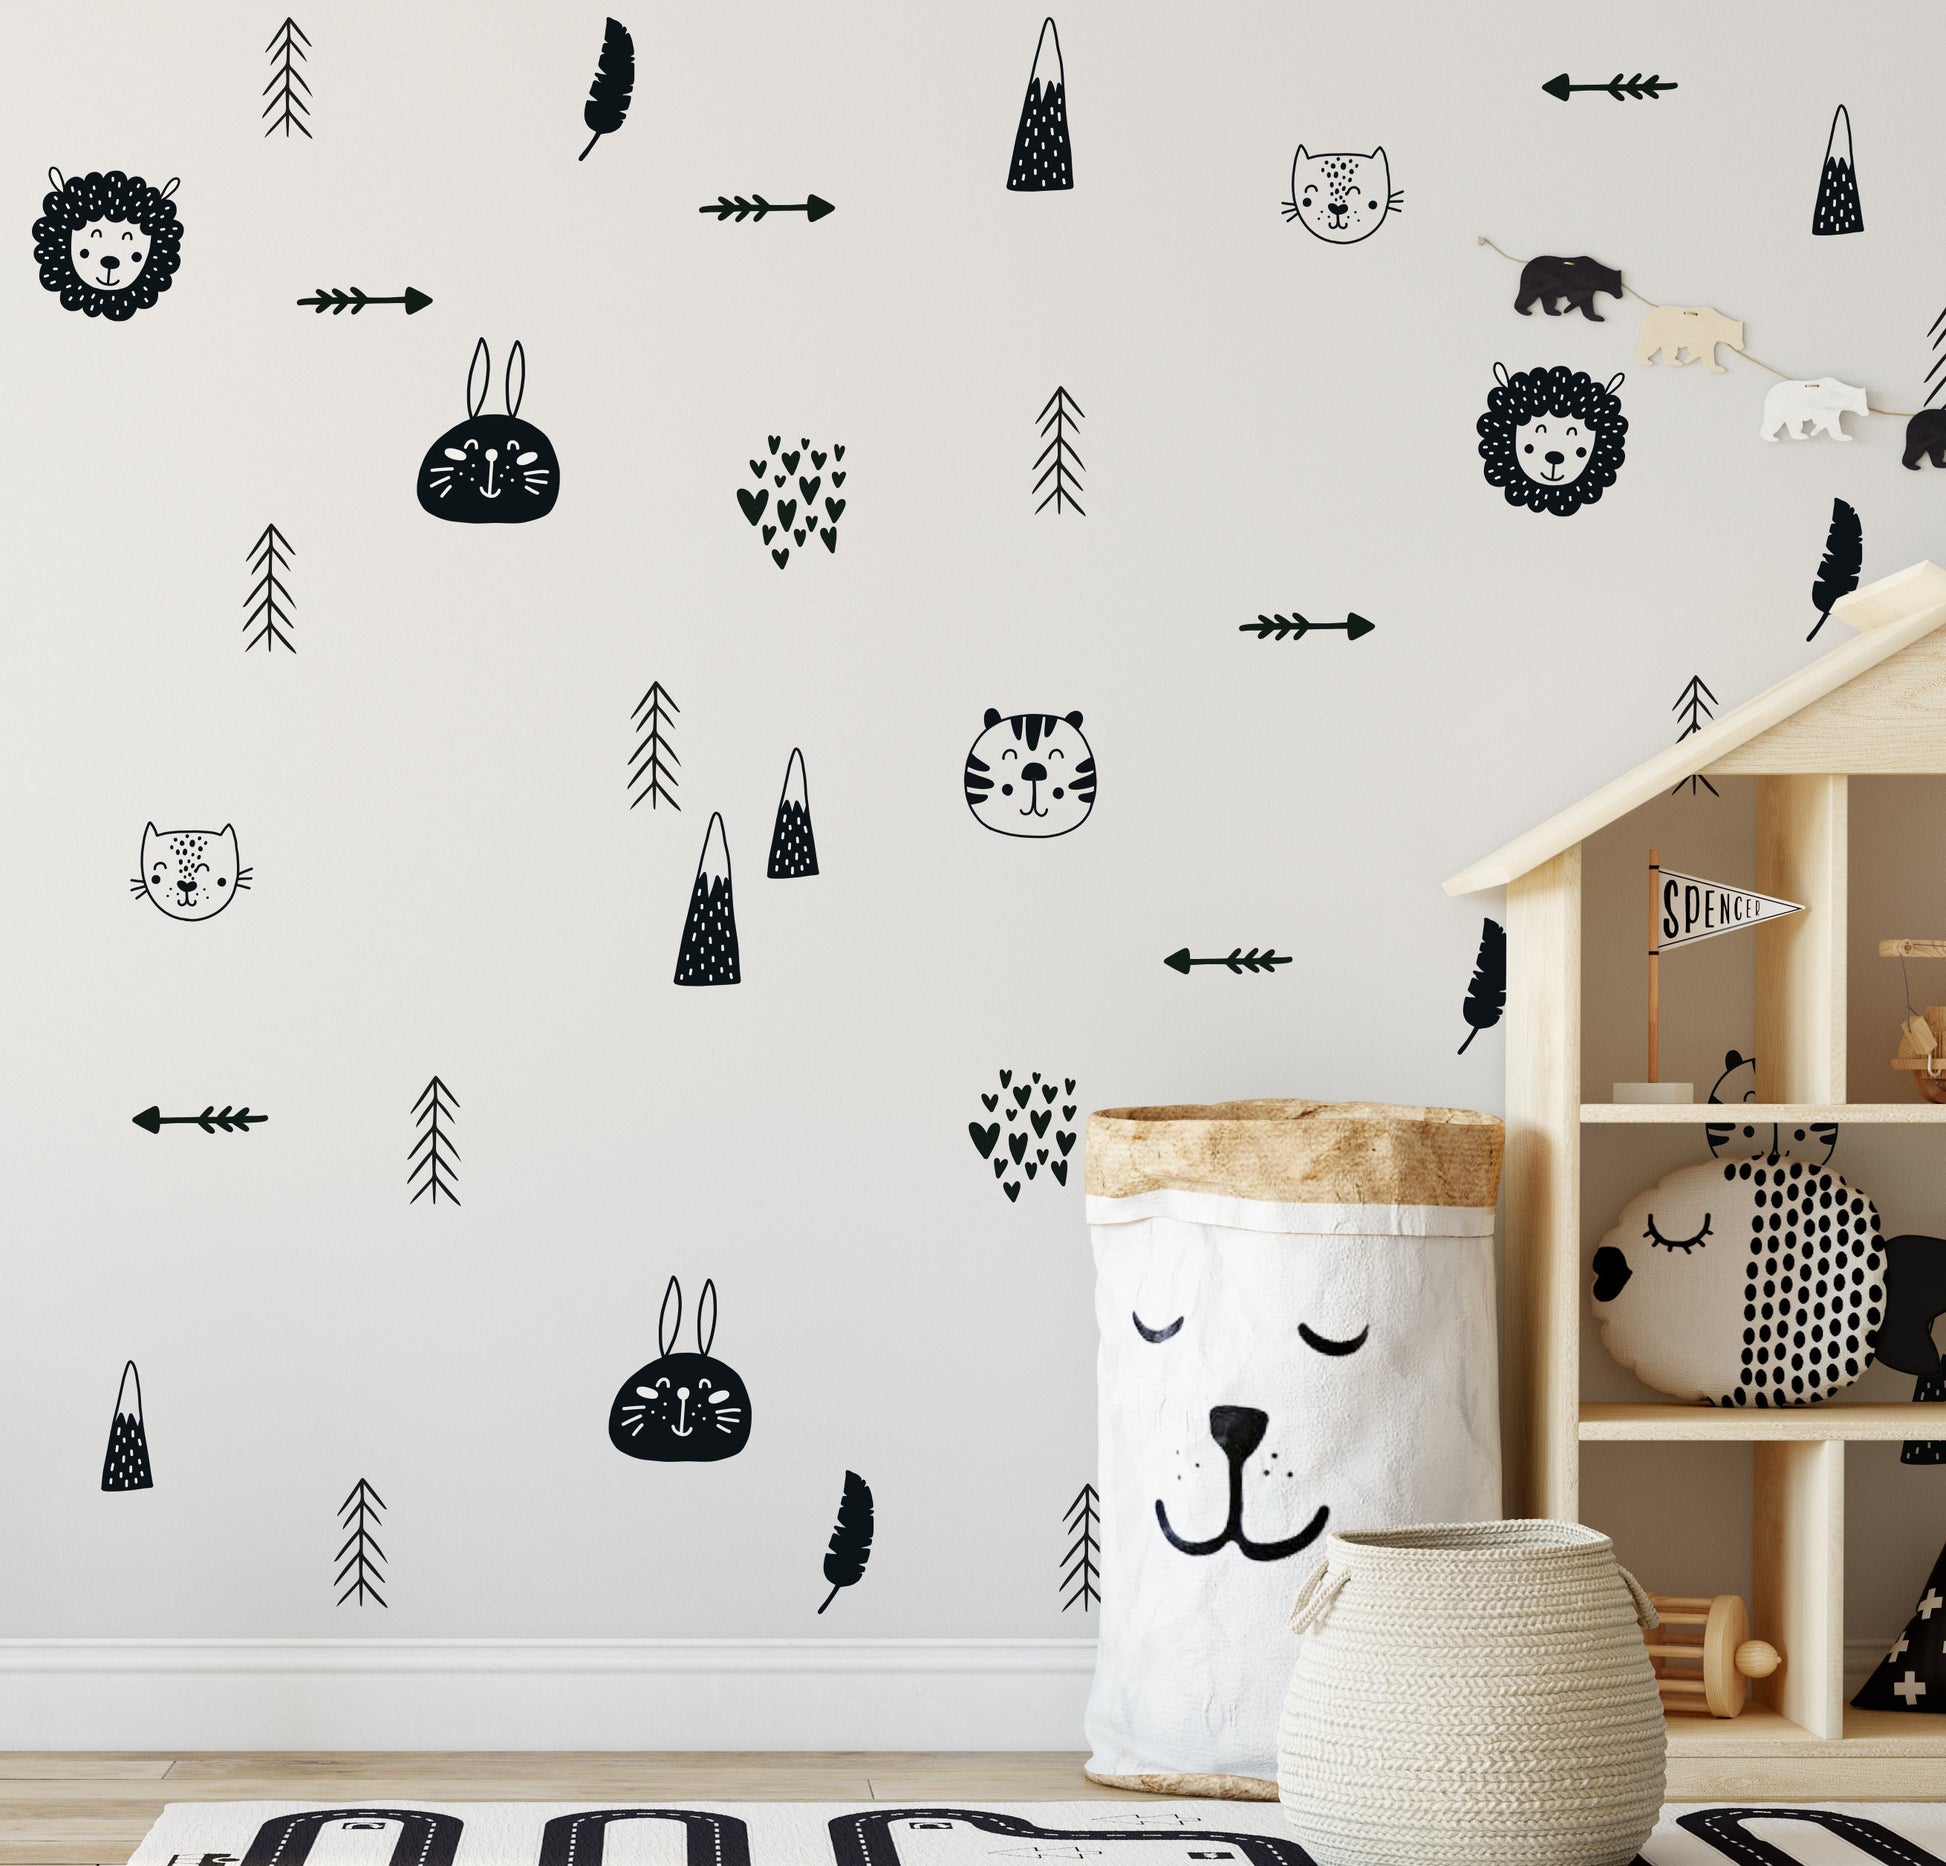 Scandi Animals Wall Stickers Scandinavian Wall Decor For Nursery Kids Room Childrens Bedroom Wall Decals Removable Boho Chic Art